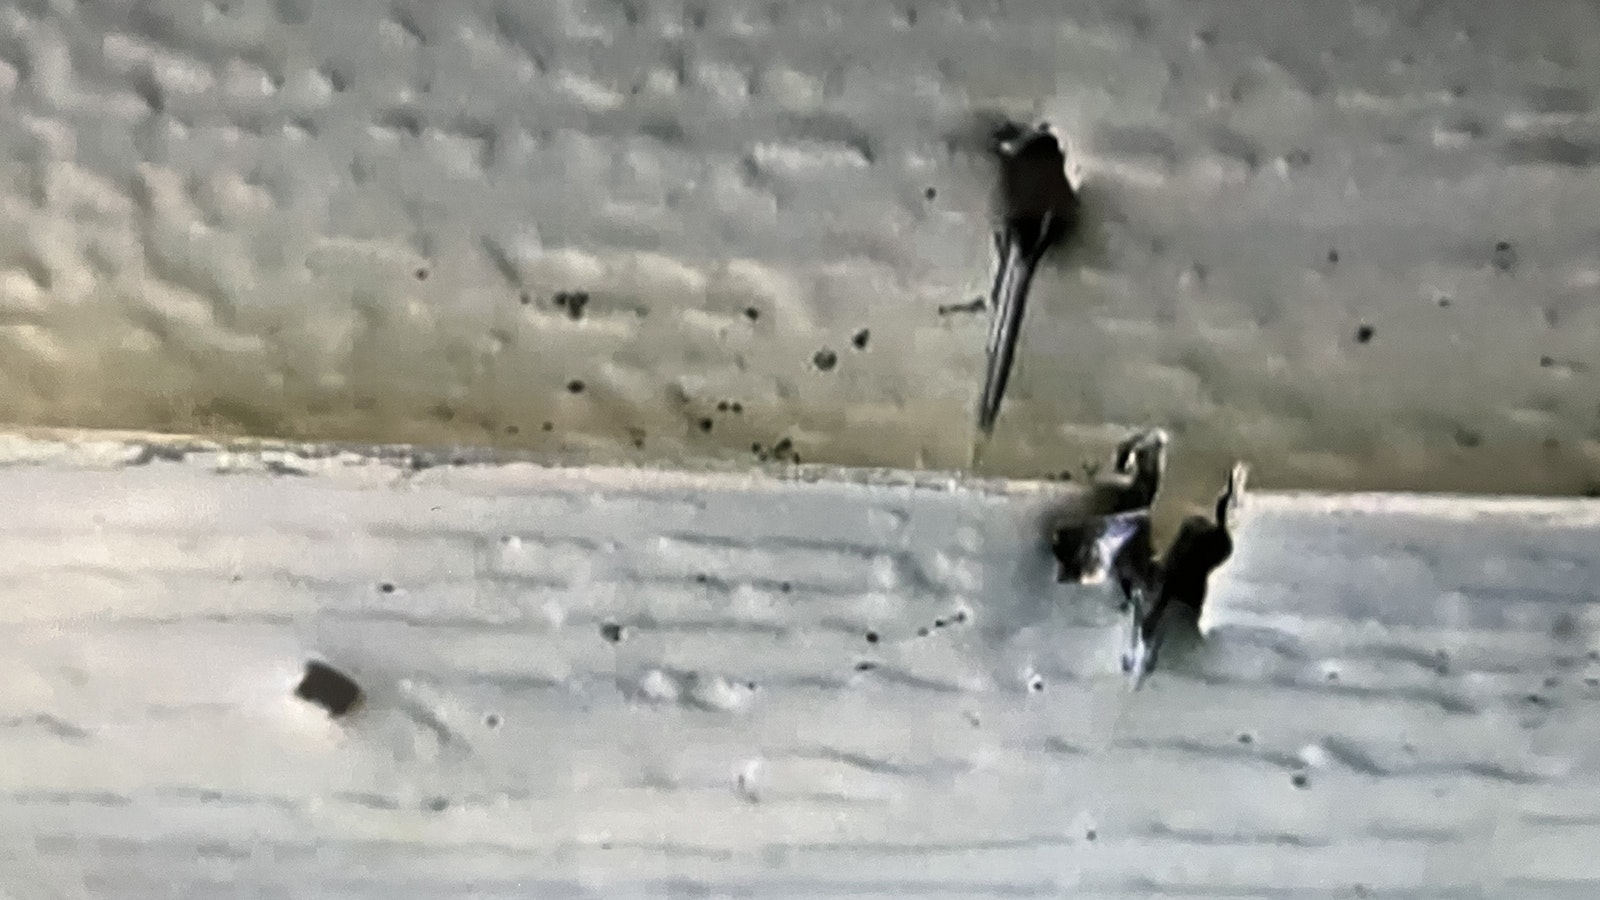 A photo presented by an Evansville couple to Natrona County commissioners on Tuesday showed three bullet holes in apparent home siding. They said it happened as a result of a neighbor’s carelessness with weapons.